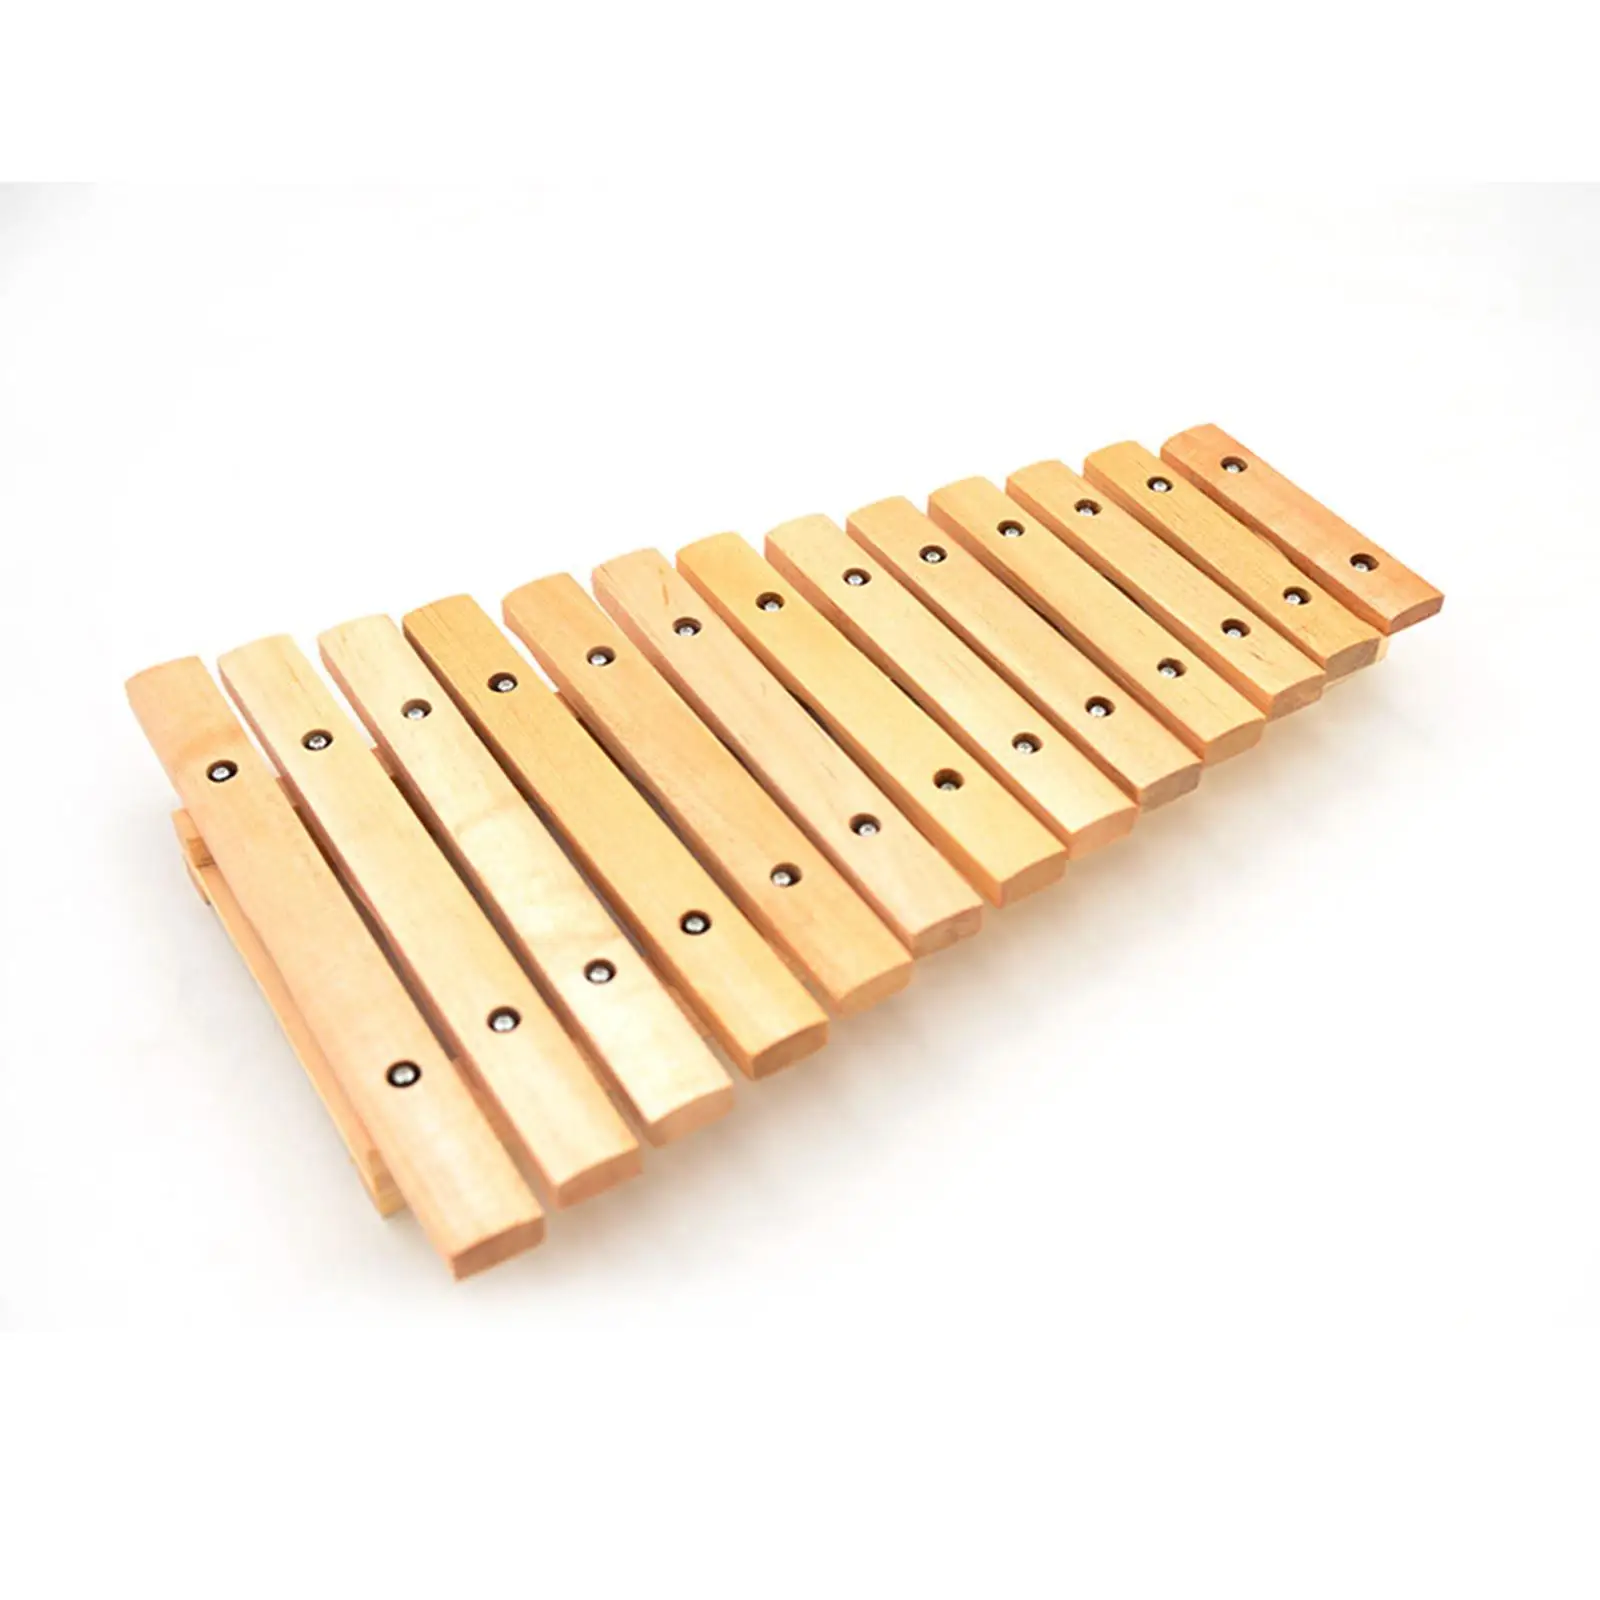 13 Note Wood Xylophone Xylophone for Kids Wood Educational Music Enlightenment Percussion Instrument for Home Music Lessons